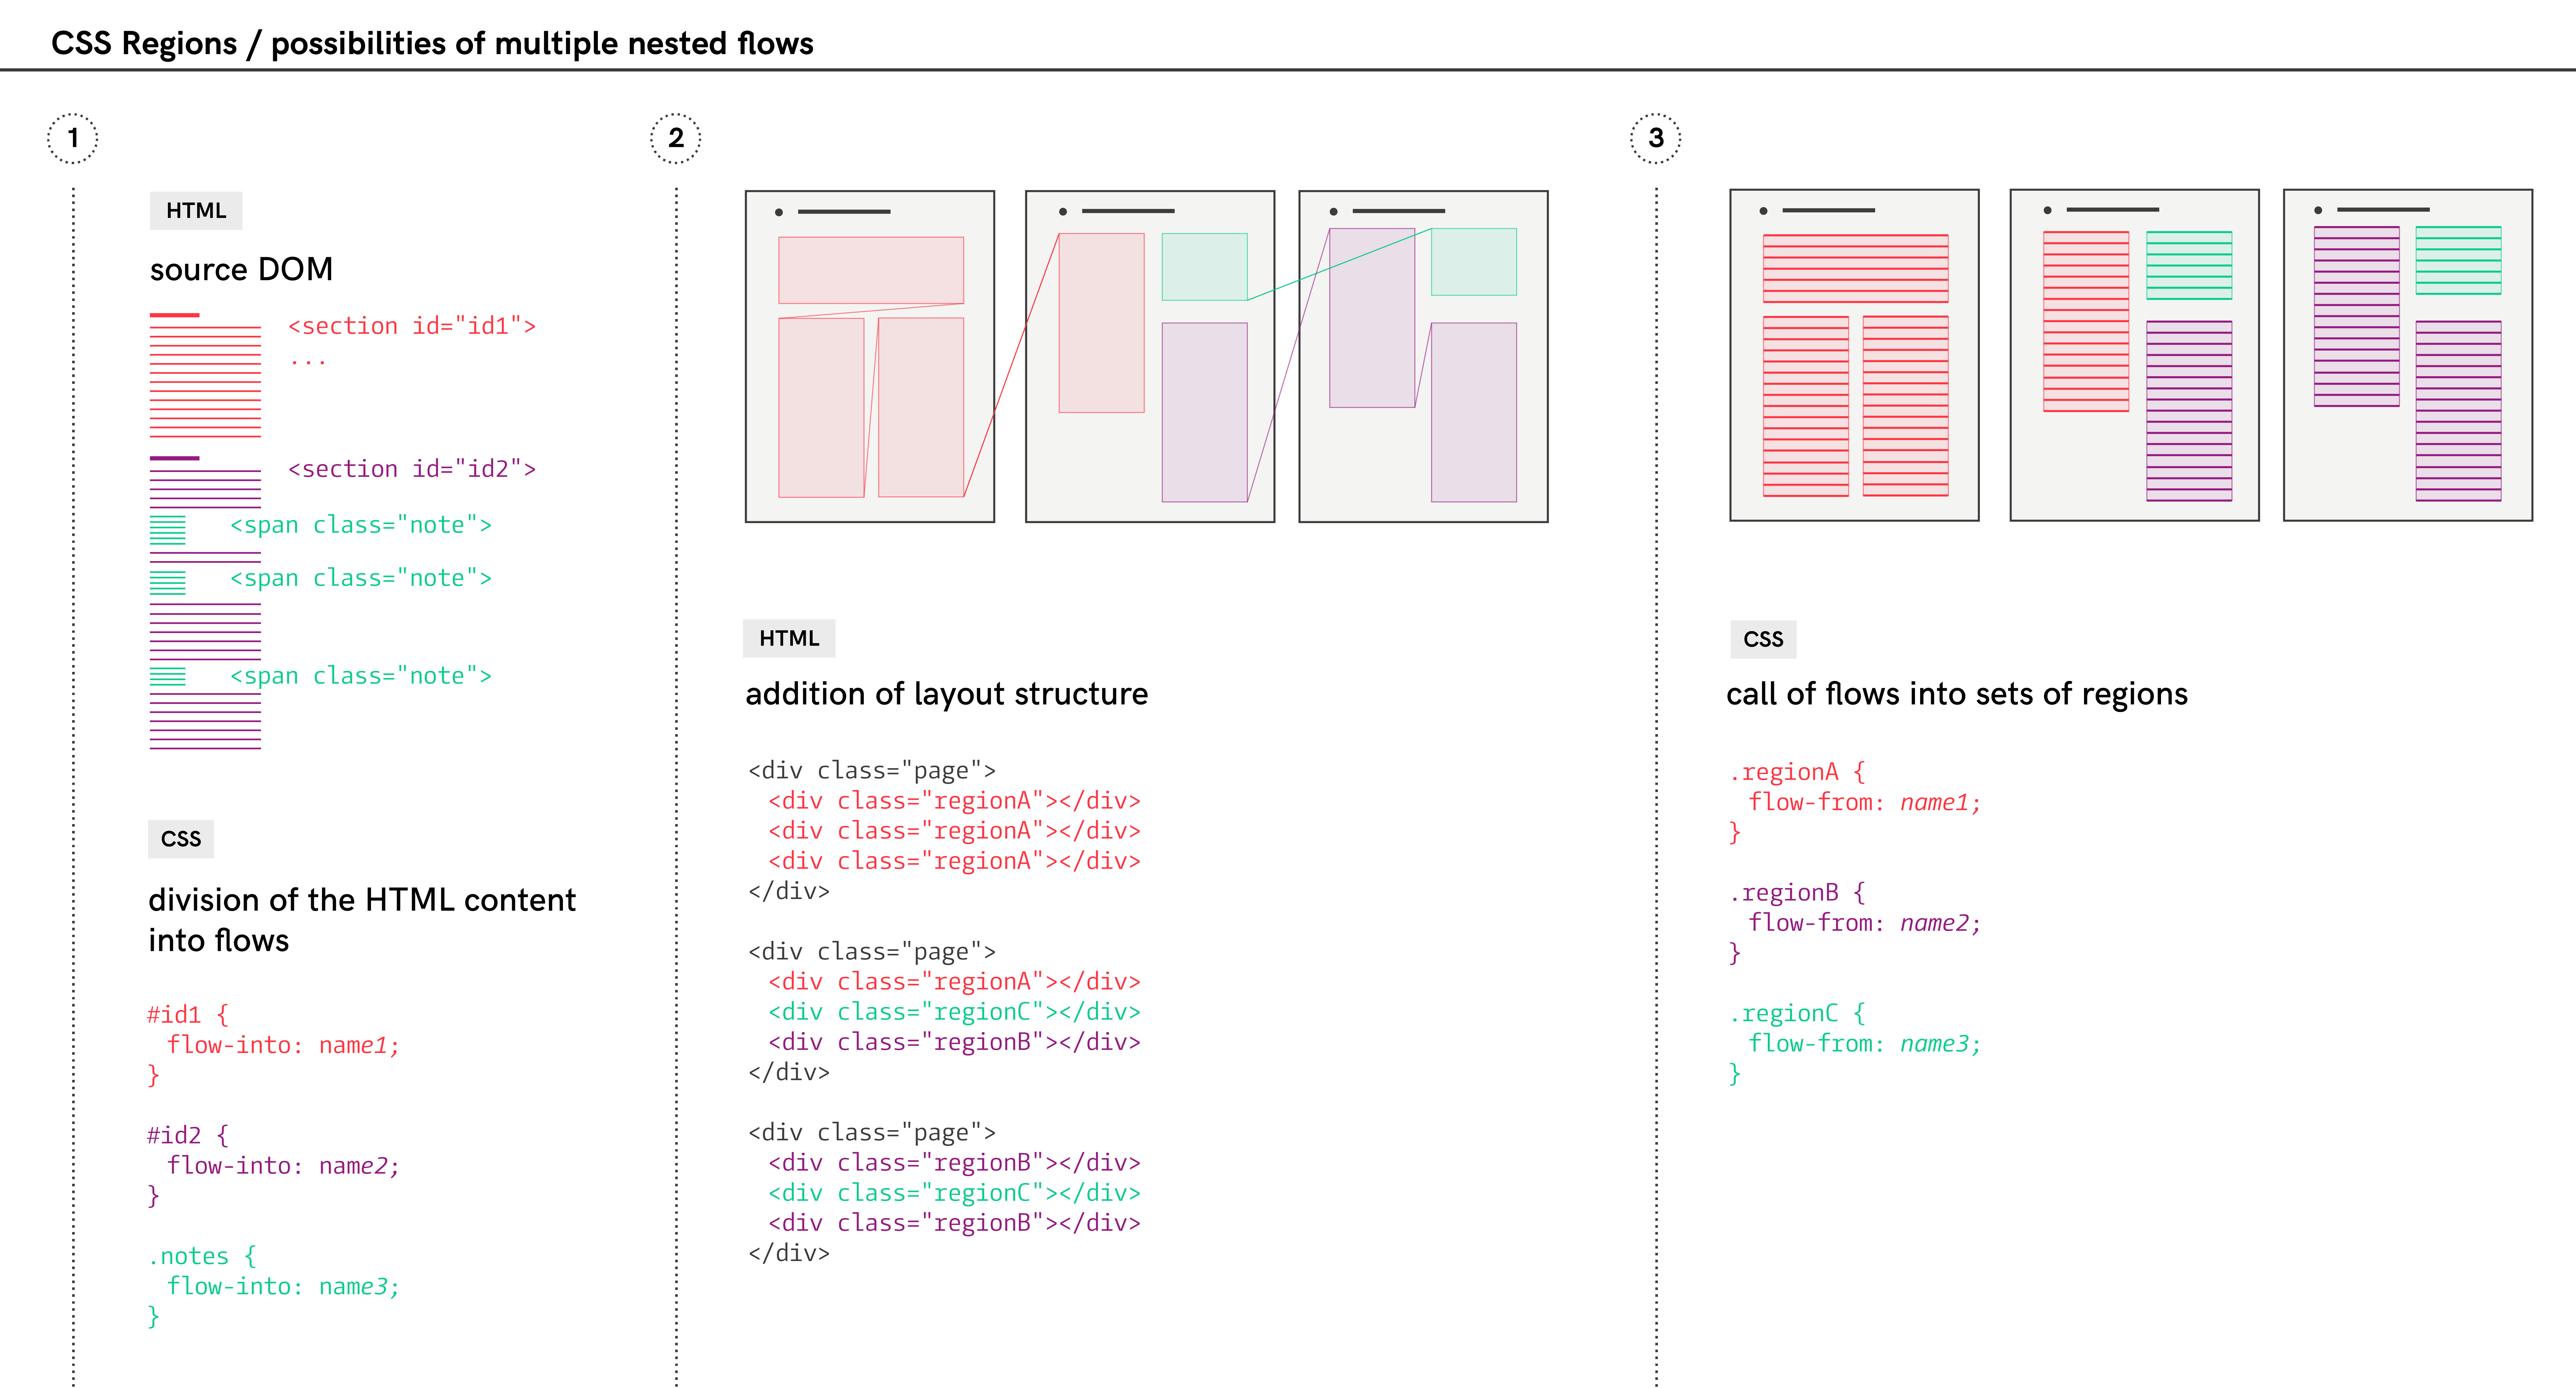 Sketch about CSS regions specifications and possibilities of multiple nested flows